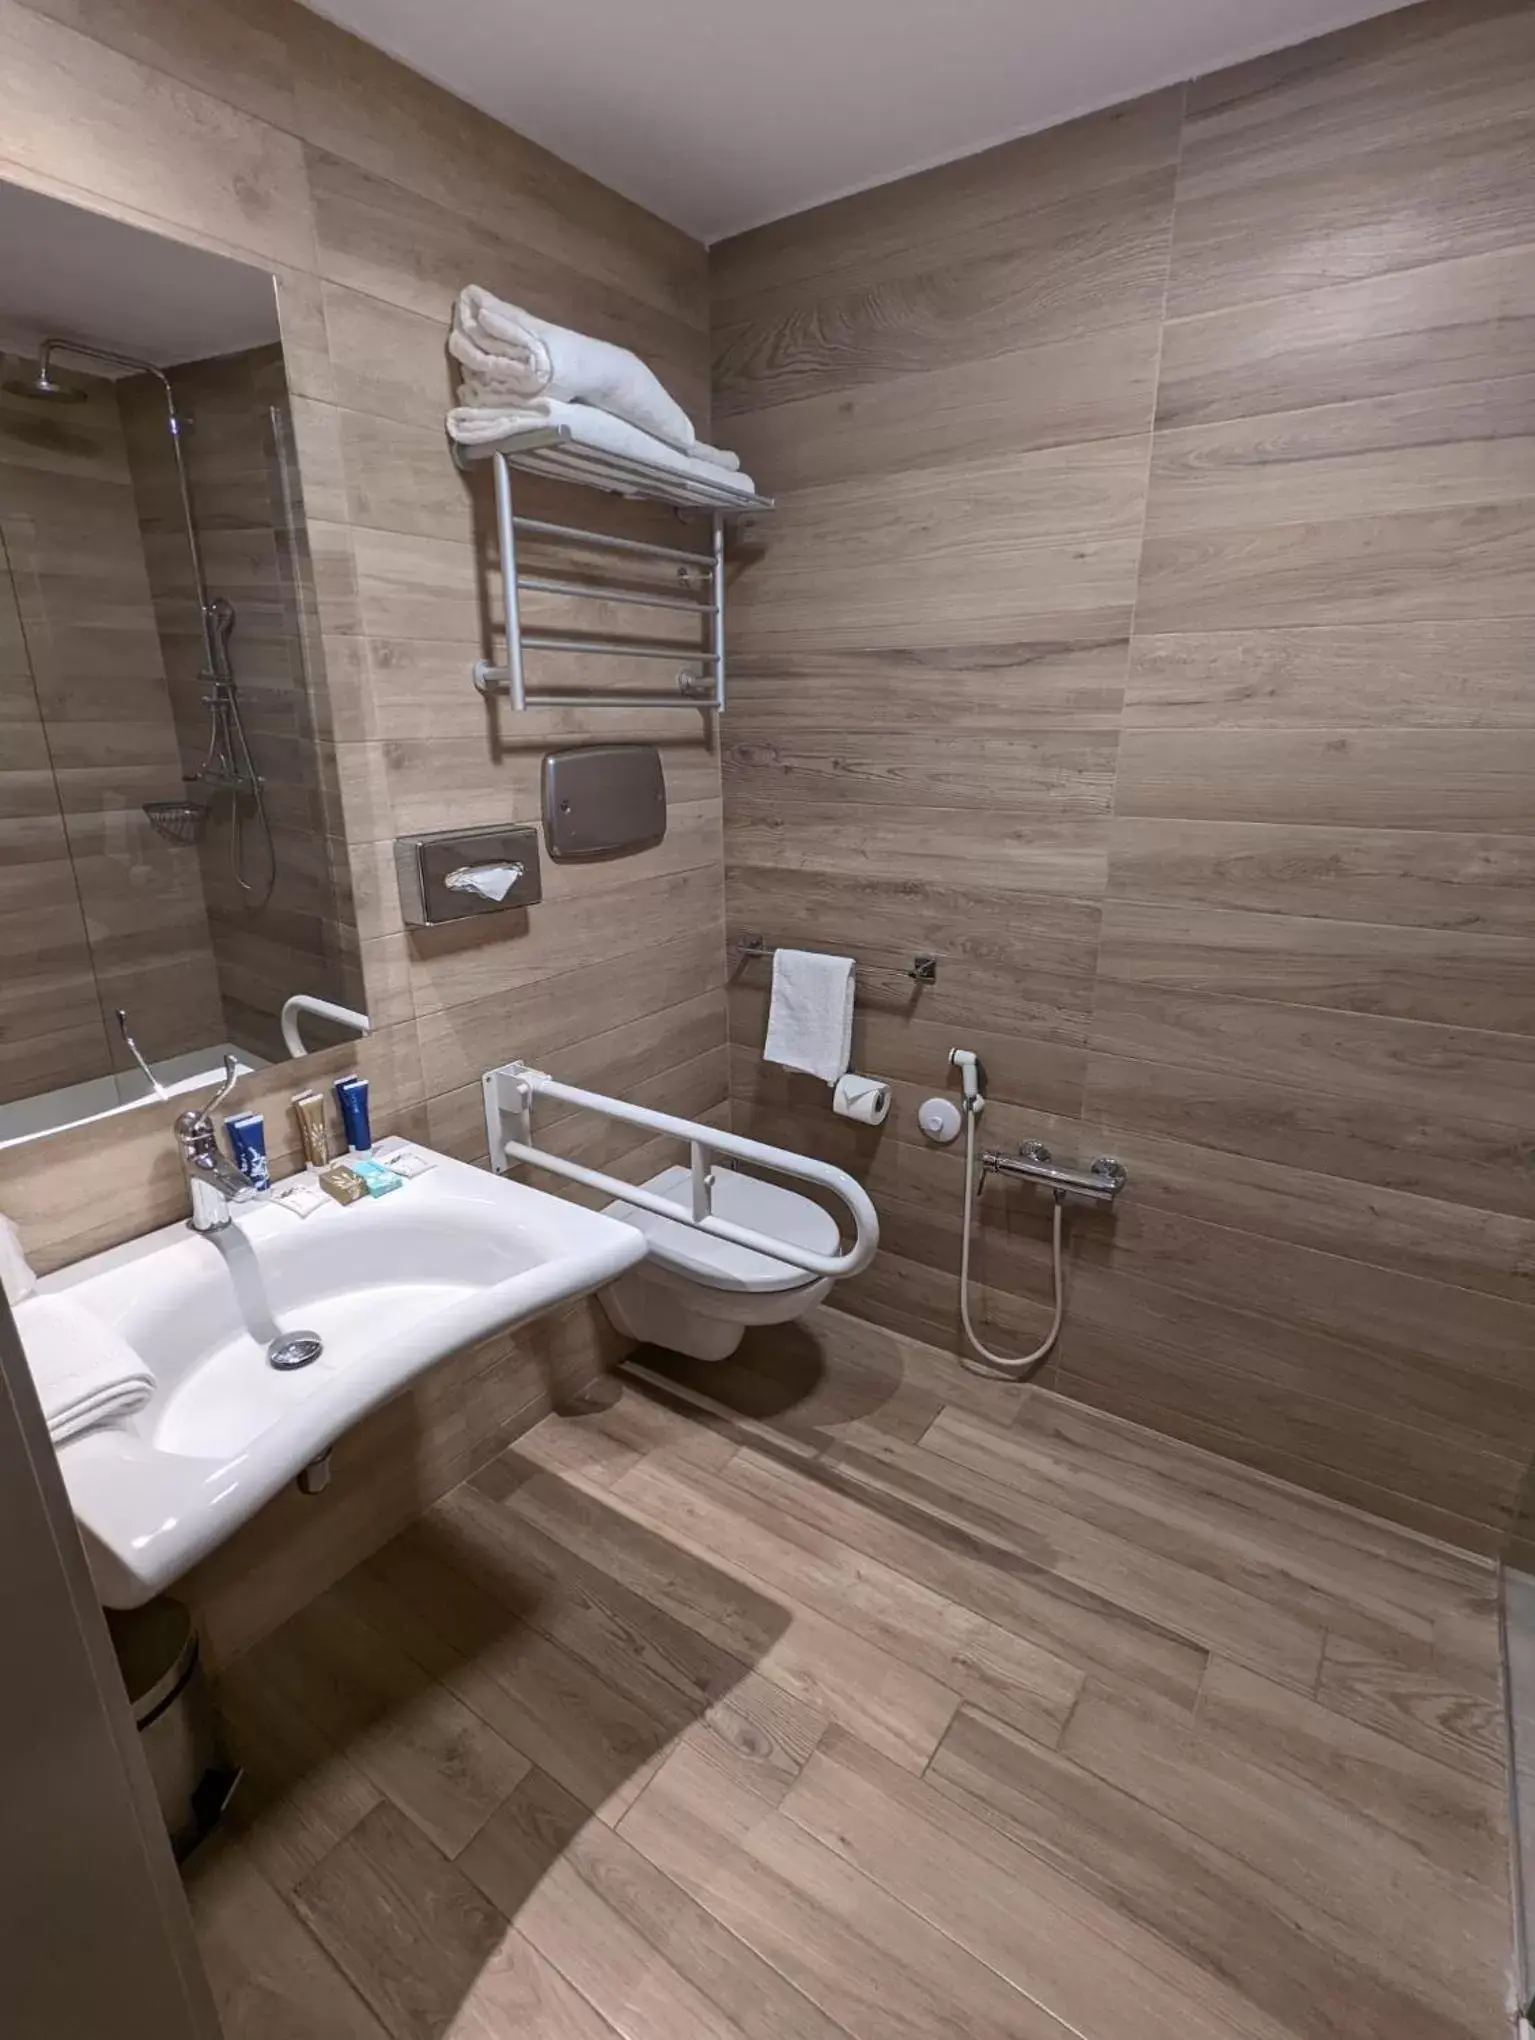 Facility for disabled guests, Bathroom in iH Hotels Milano Lorenteggio